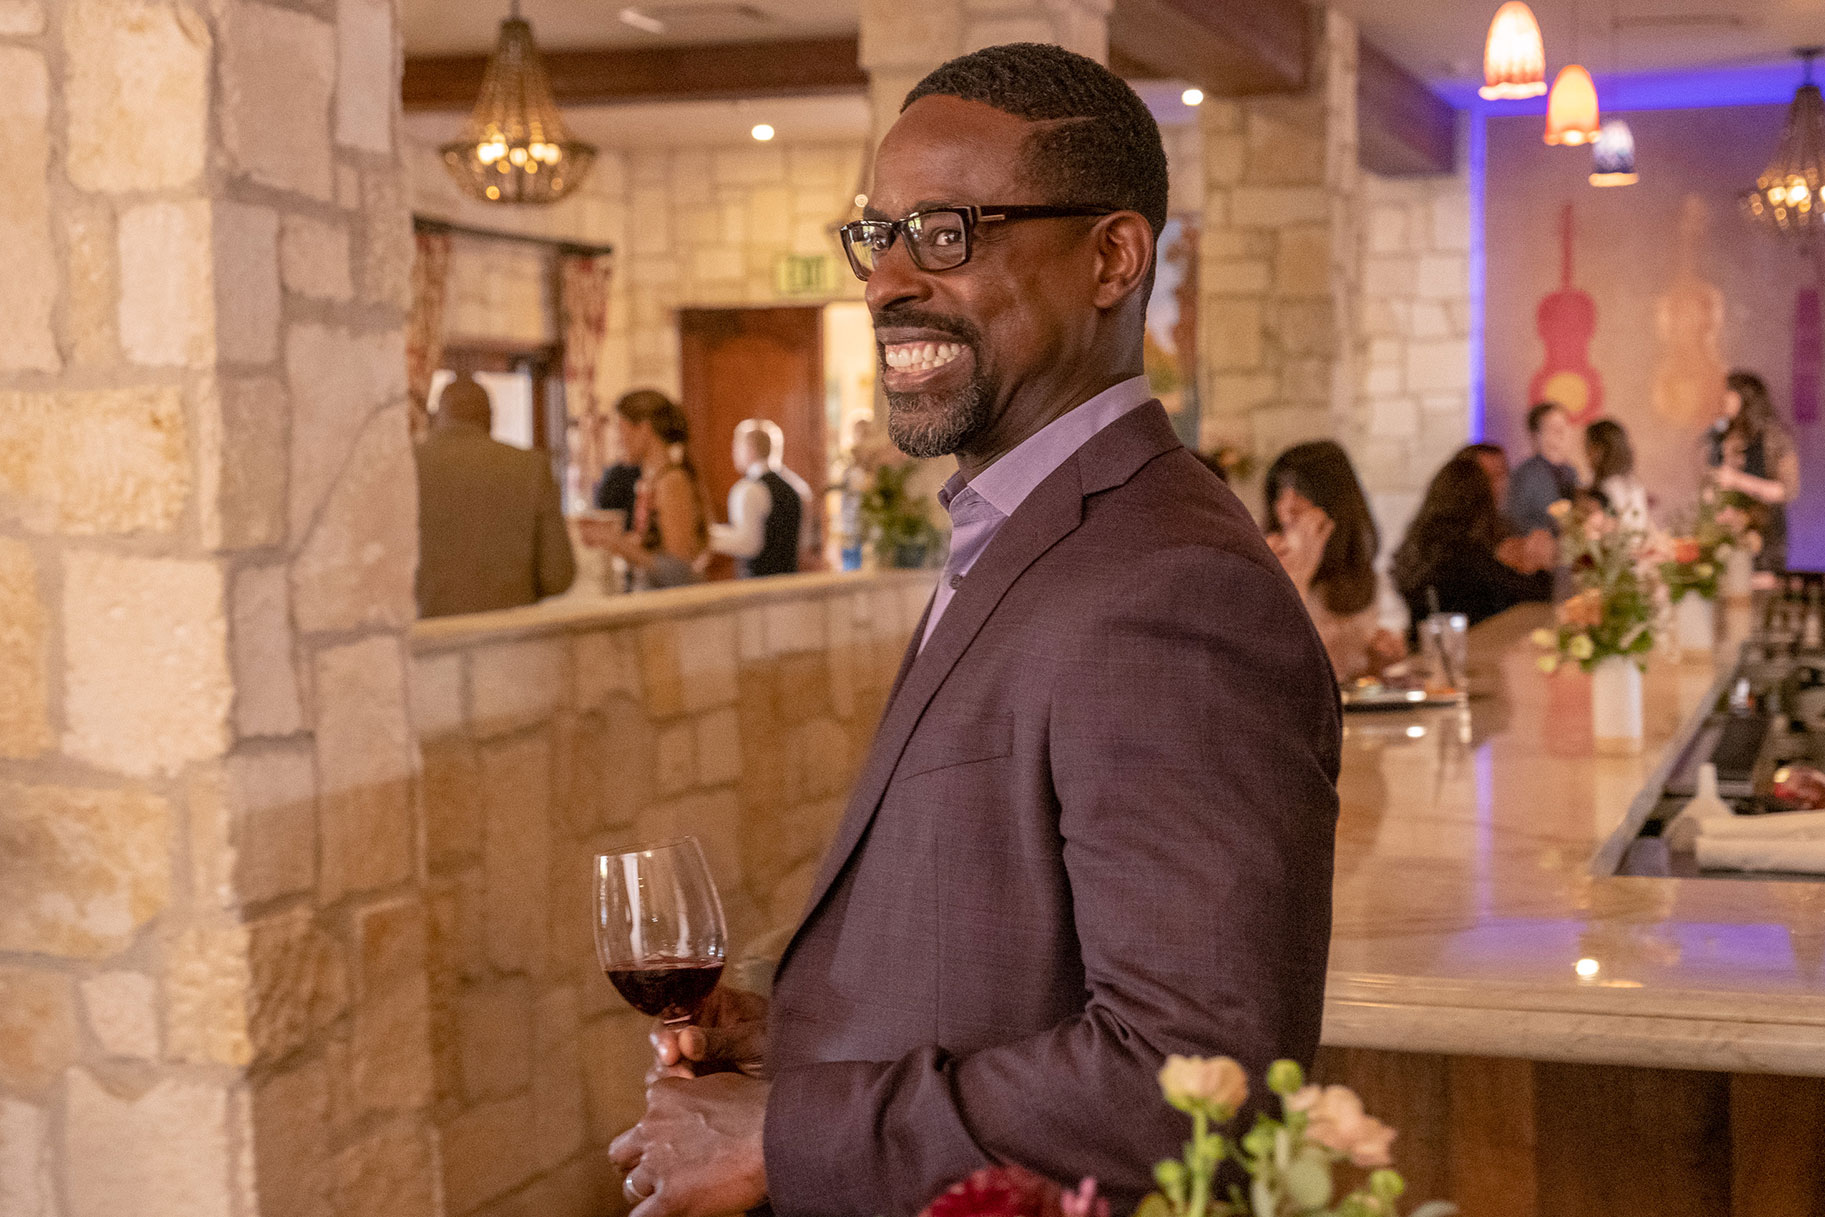 Randall smiling while holding a glass of red wine during Kate's wedding